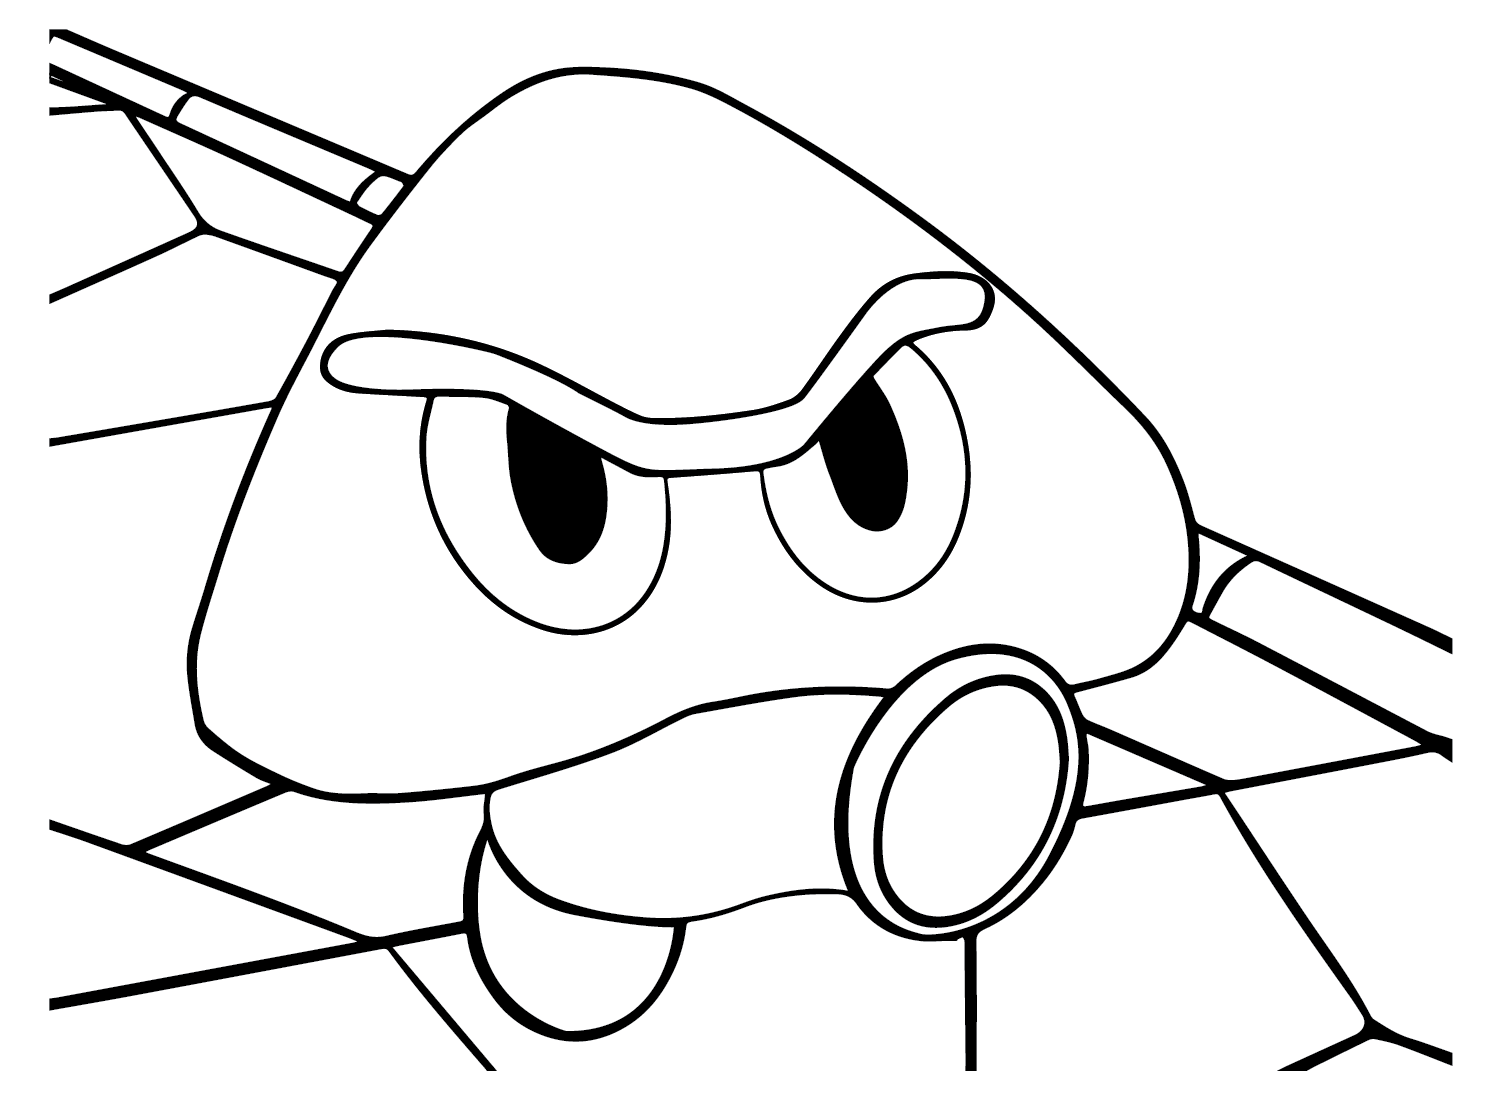 Goomba images coloring page